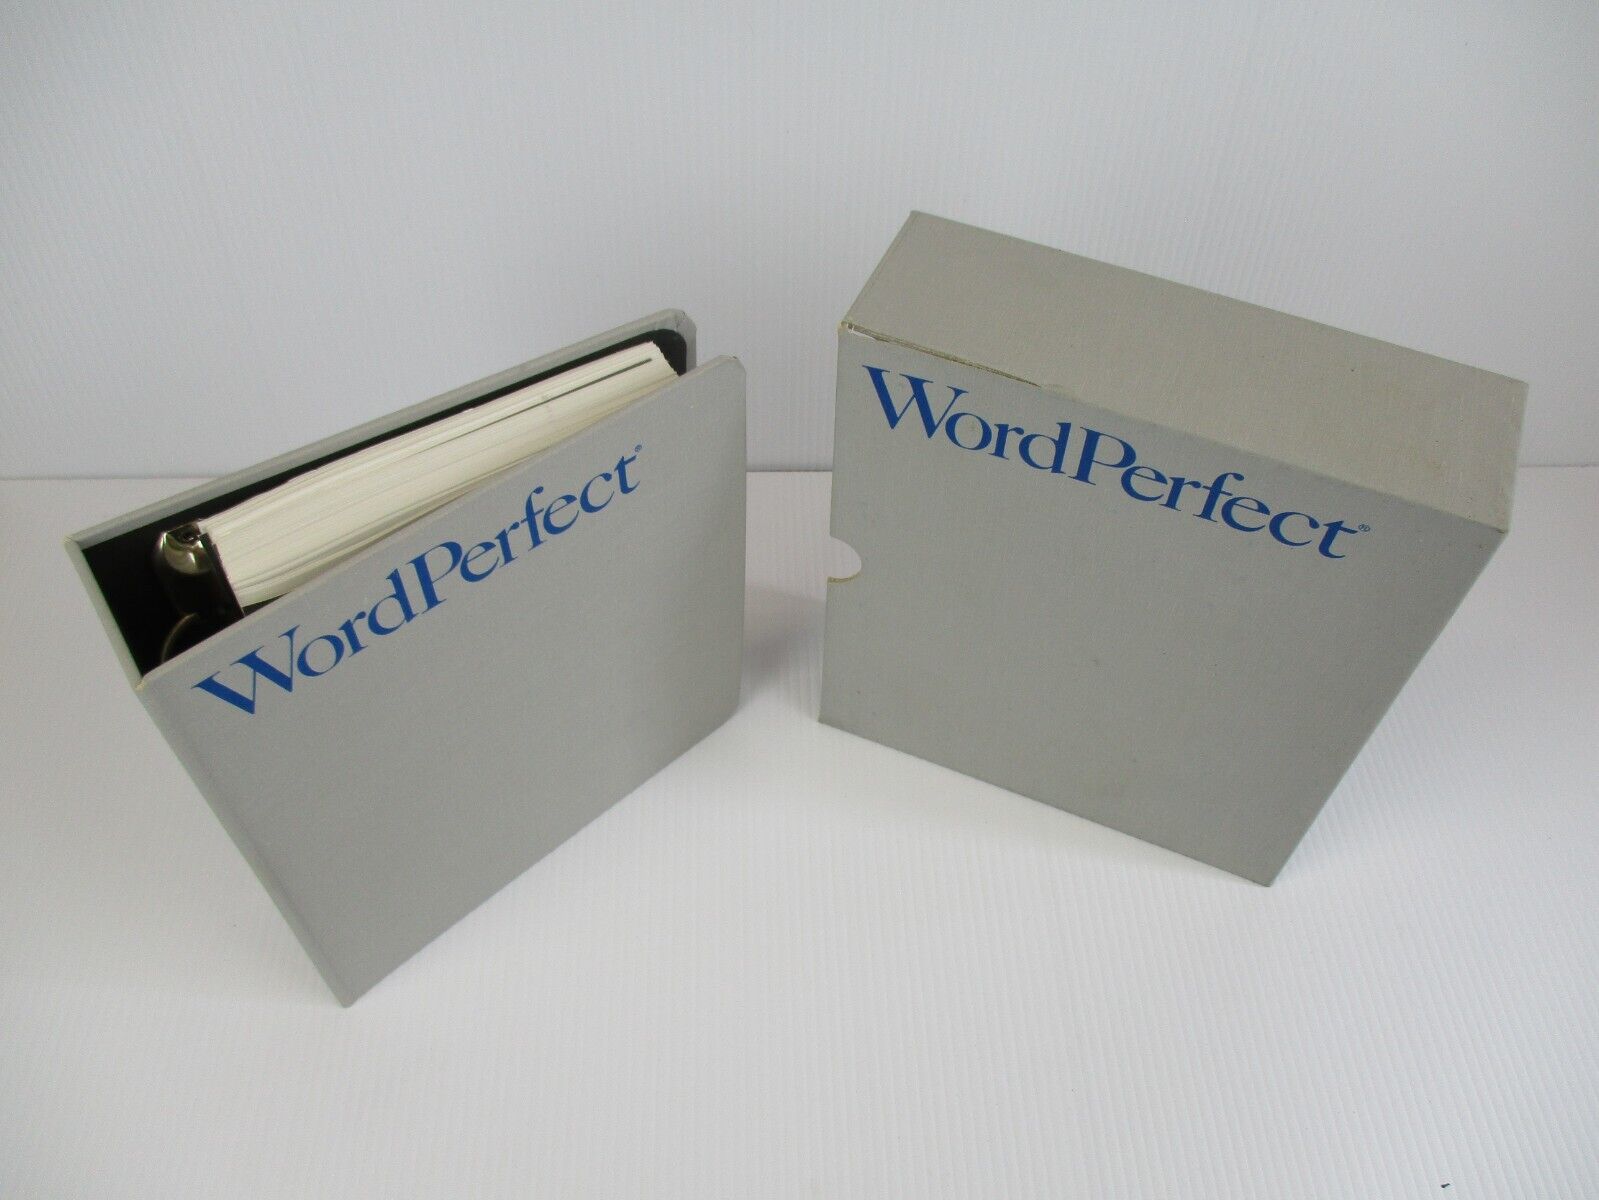 Vintage IBM Word Perfect Manual Guide Binder 1988 Good Condition